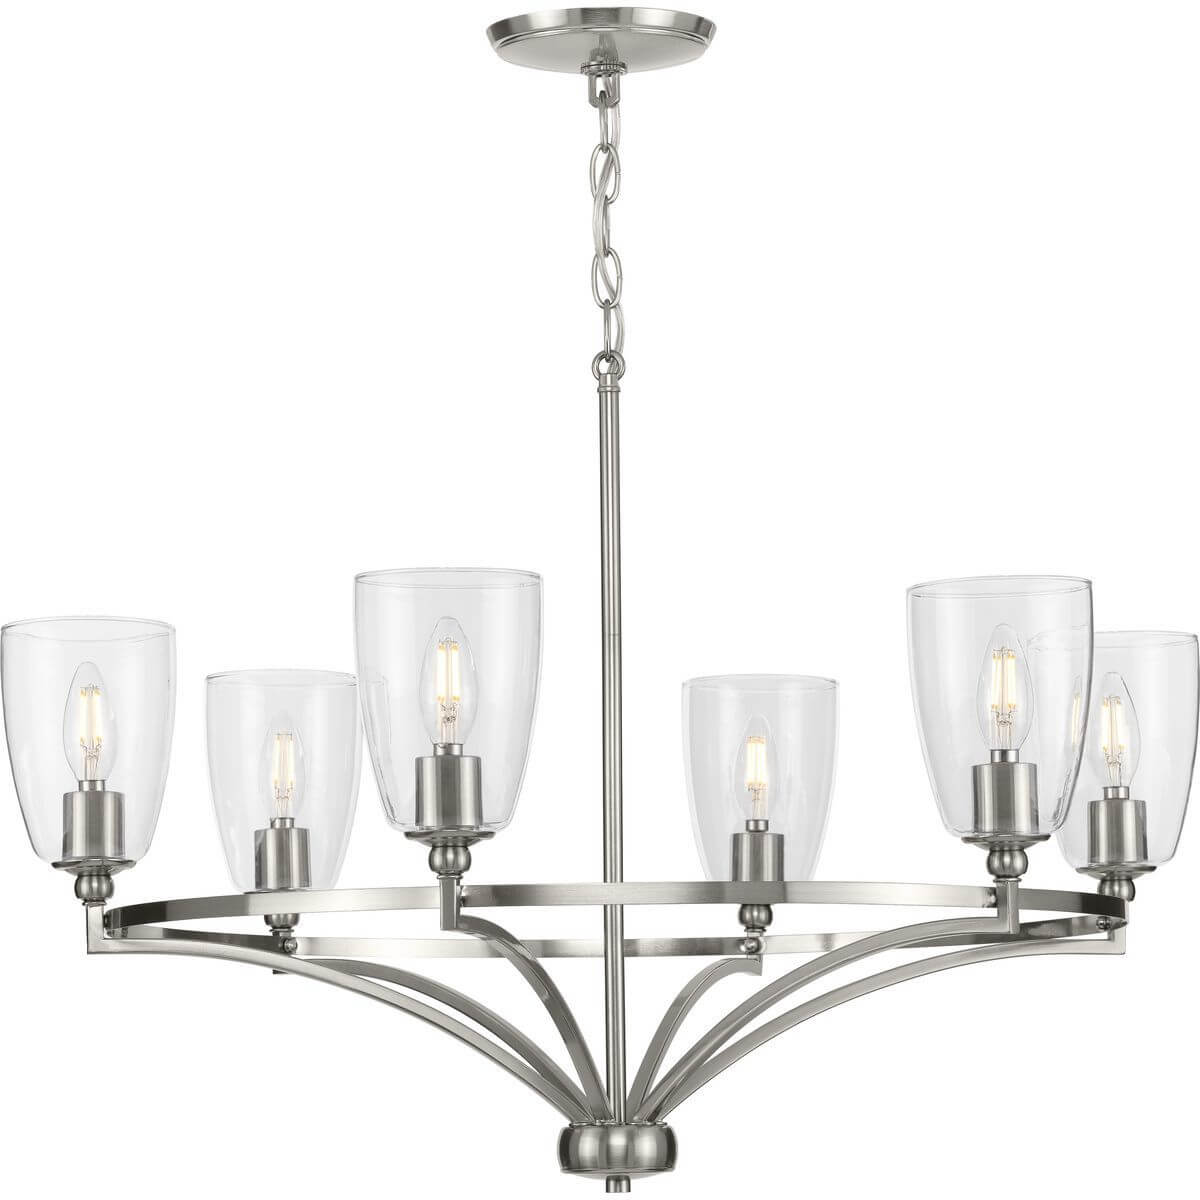 Progress Lighting Parkhurst 6 Light 30 inch Chandelier in Brushed Nickel with Clear Glass P400297-009